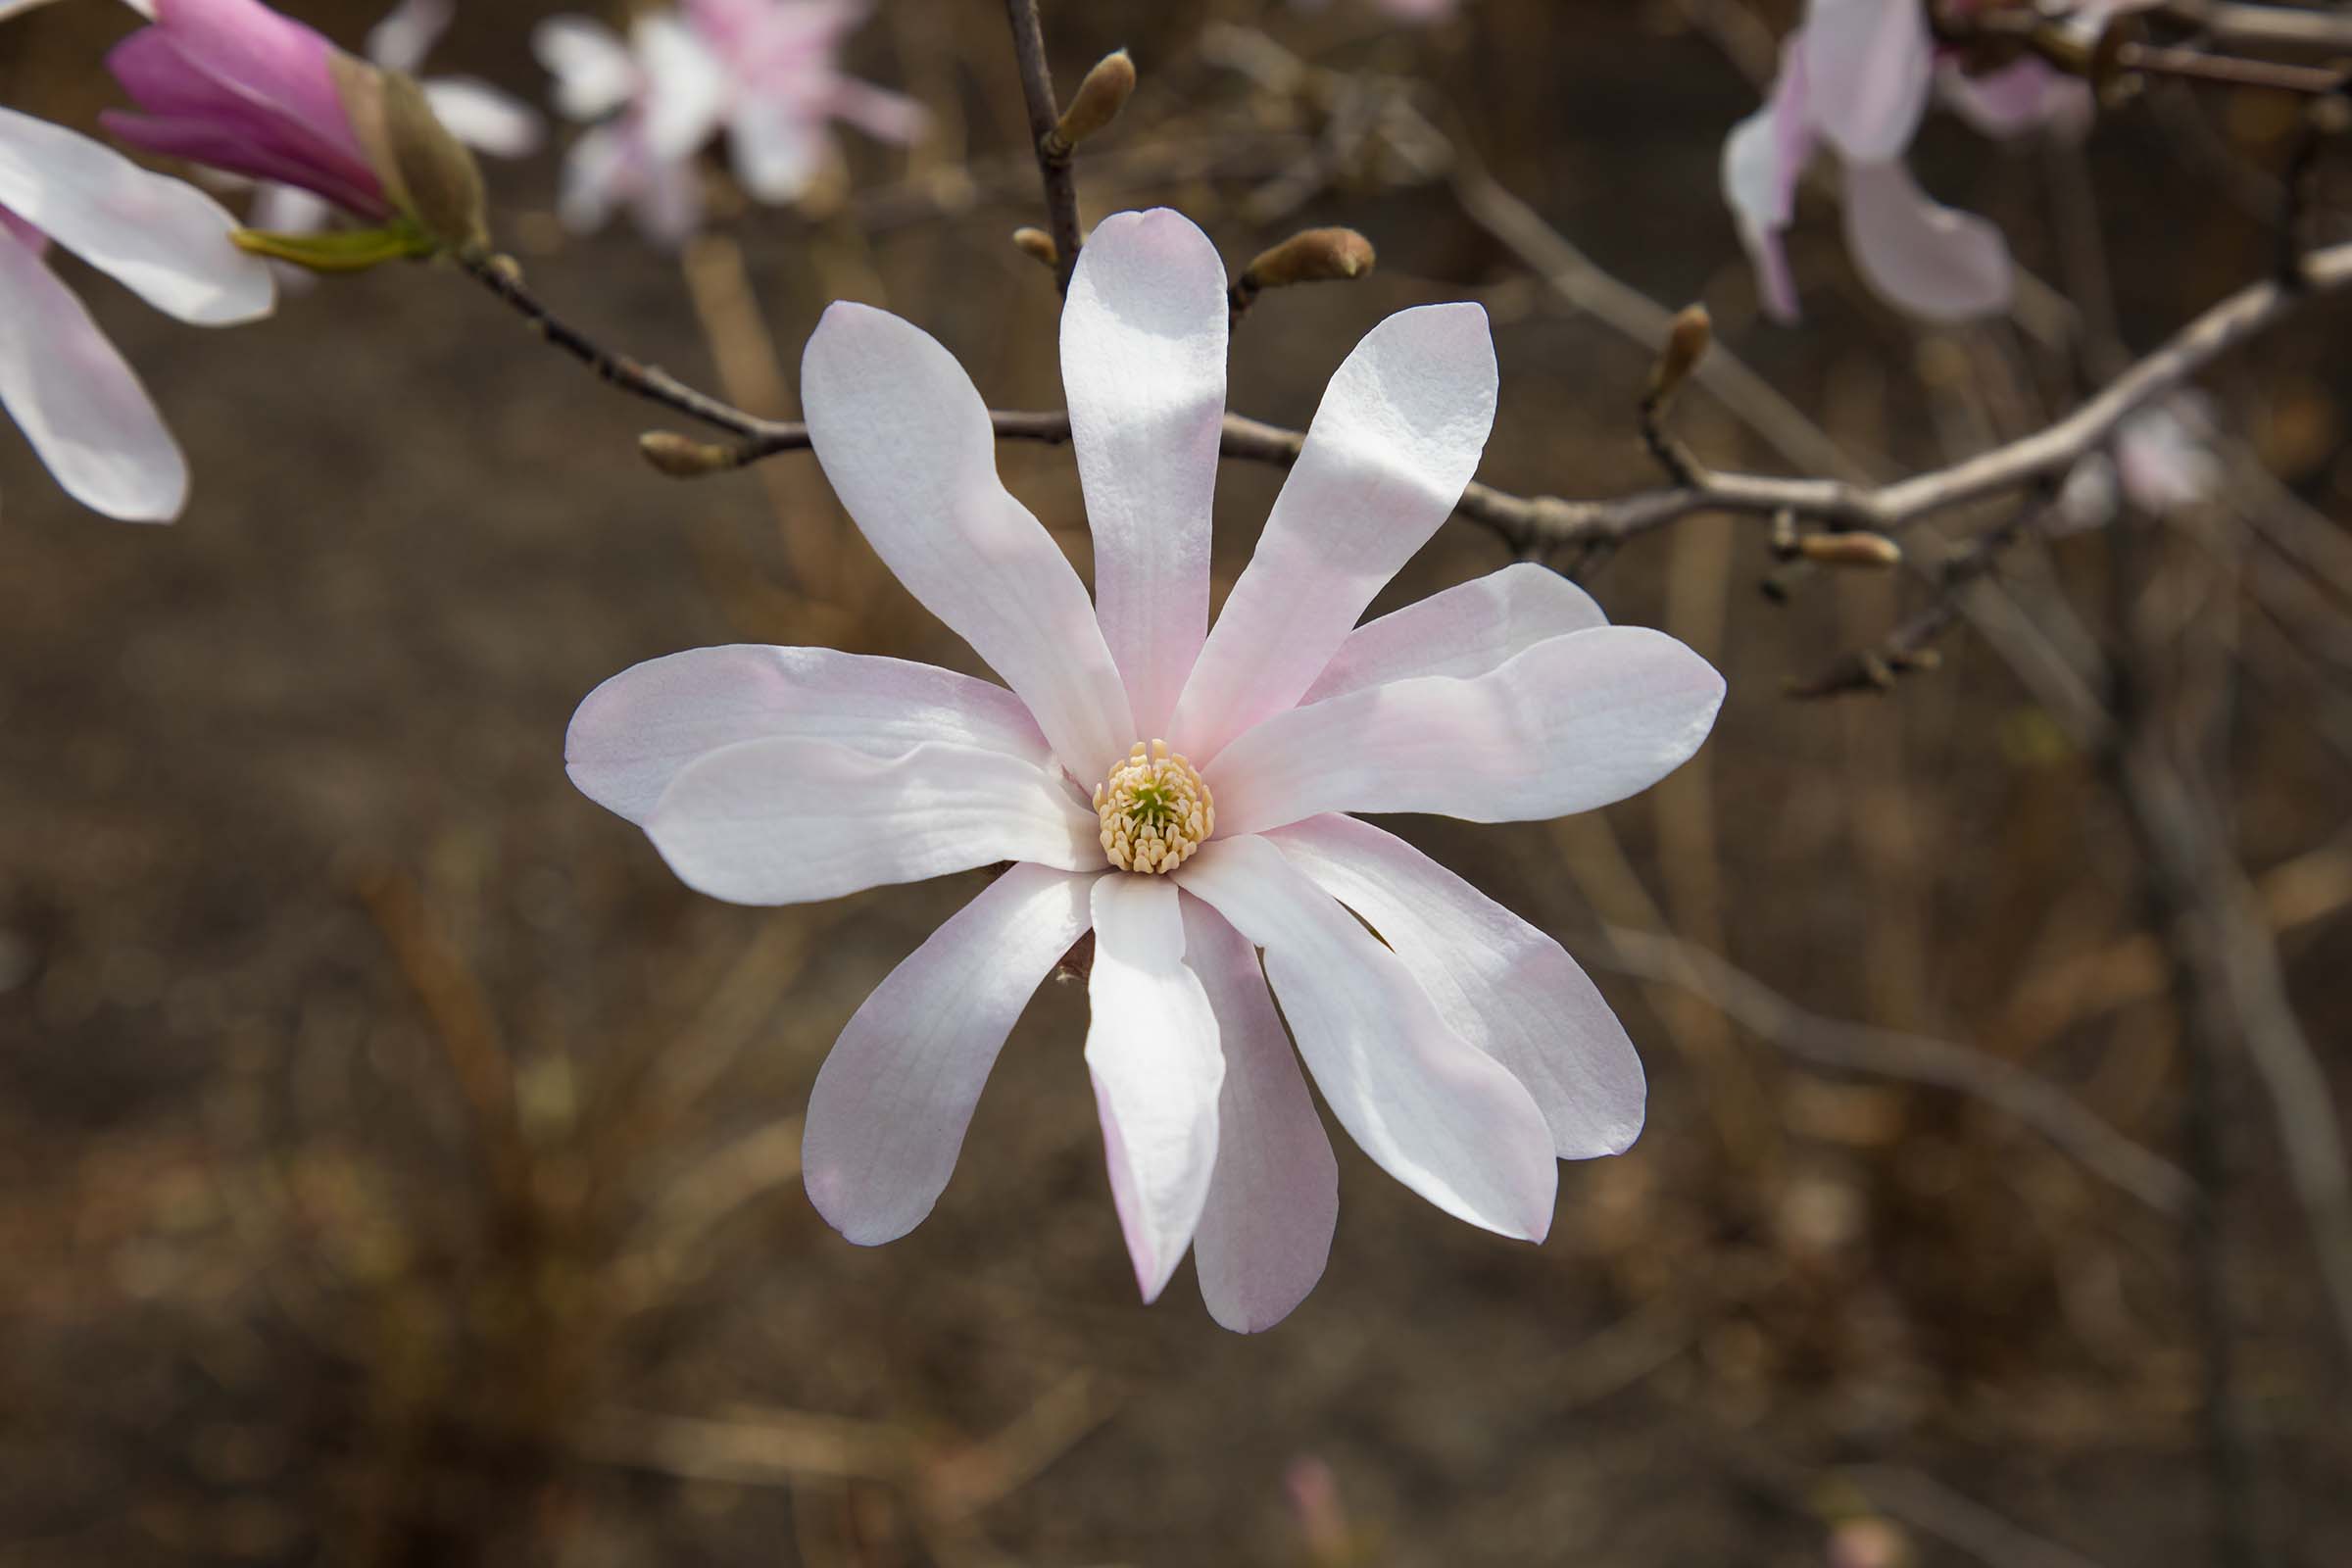 A front view of the star magnolia that resembles a daisy as the petals stretch out